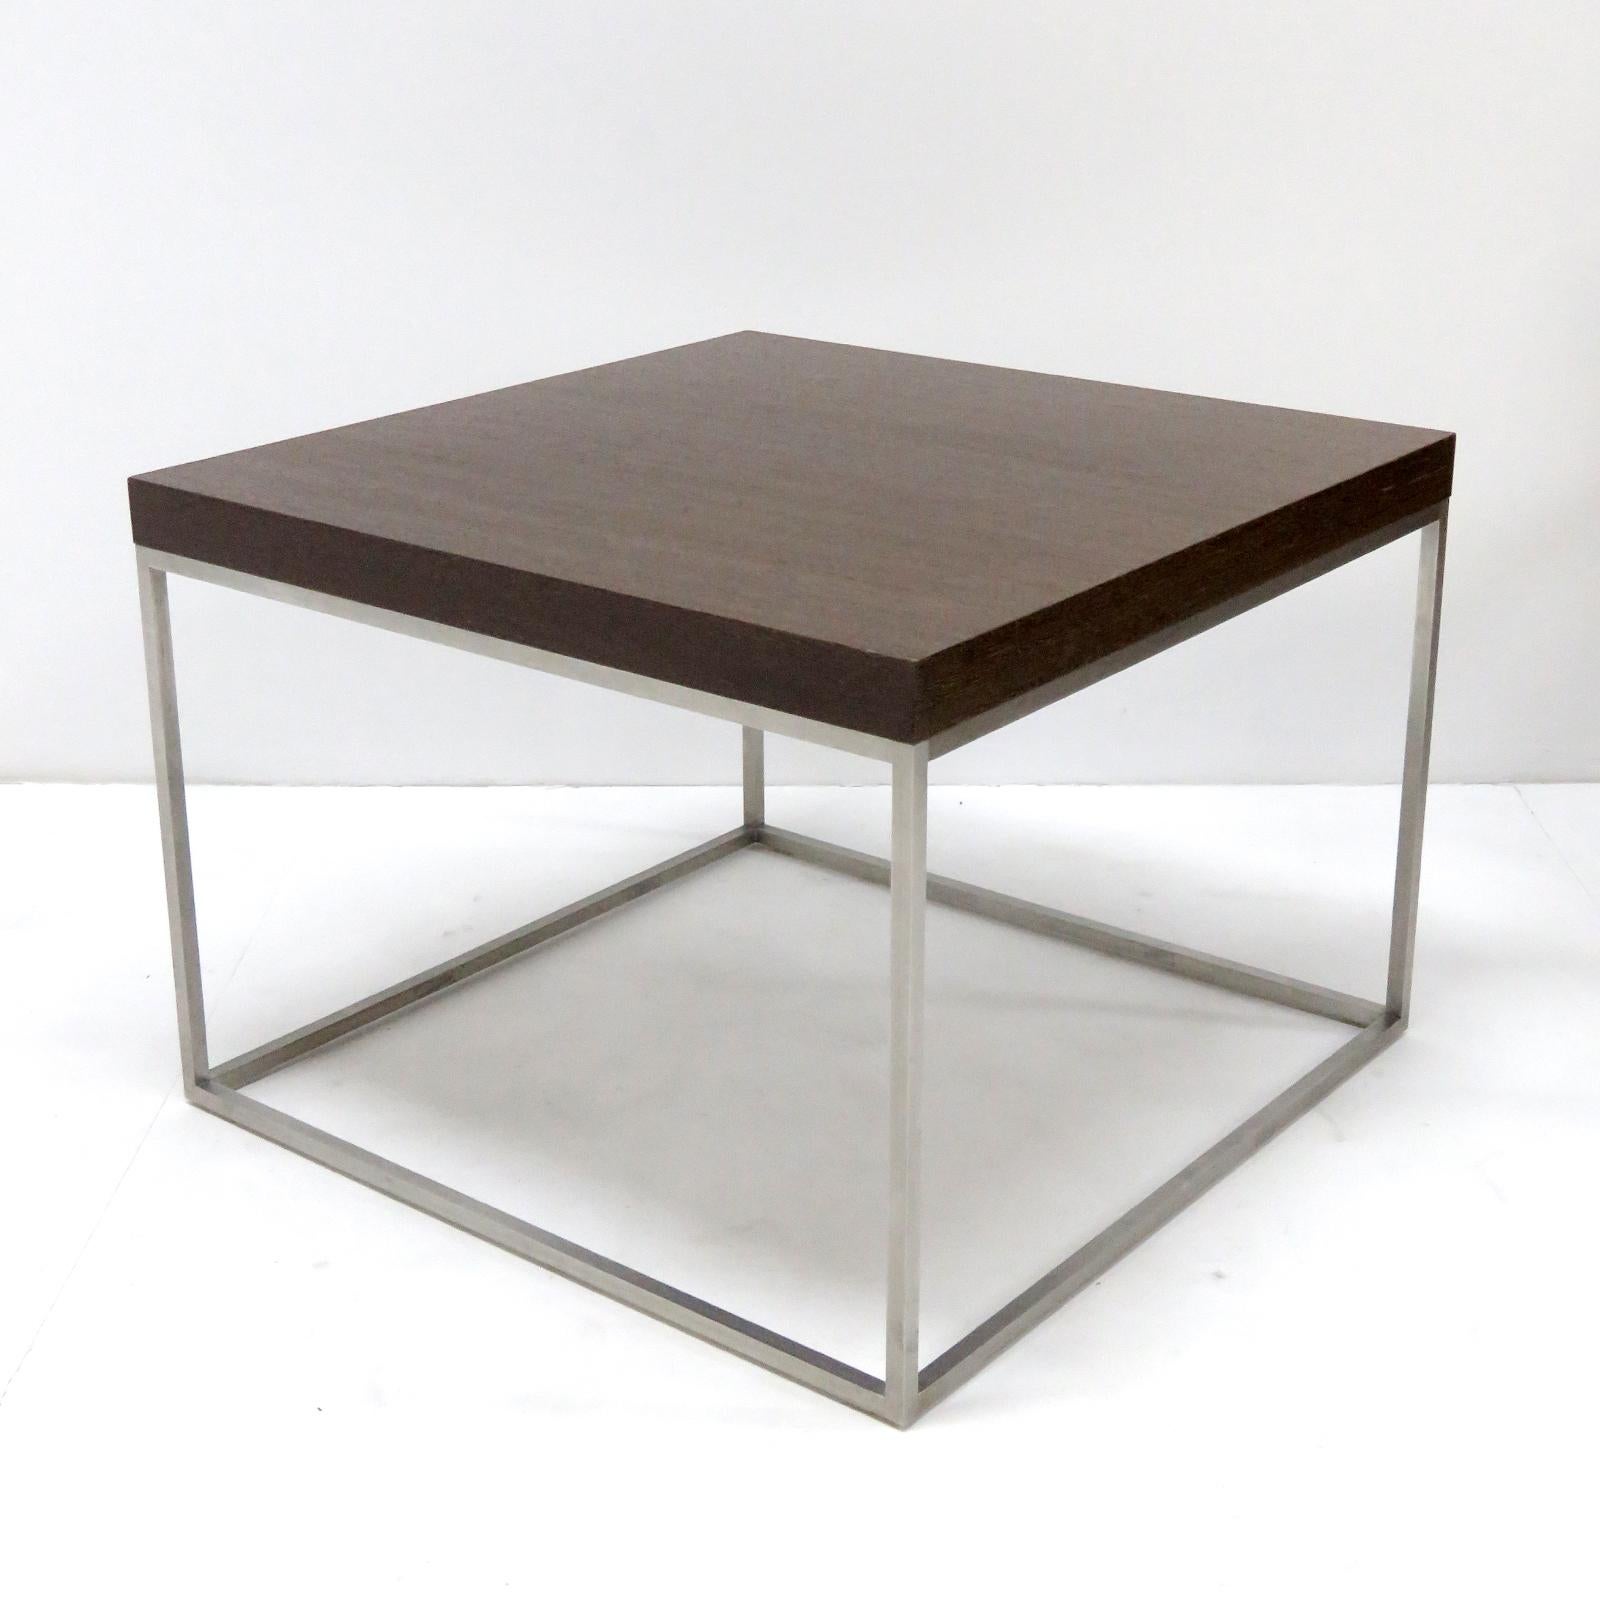 Modern Paolo Piva 'Madison Square' Coffee Table